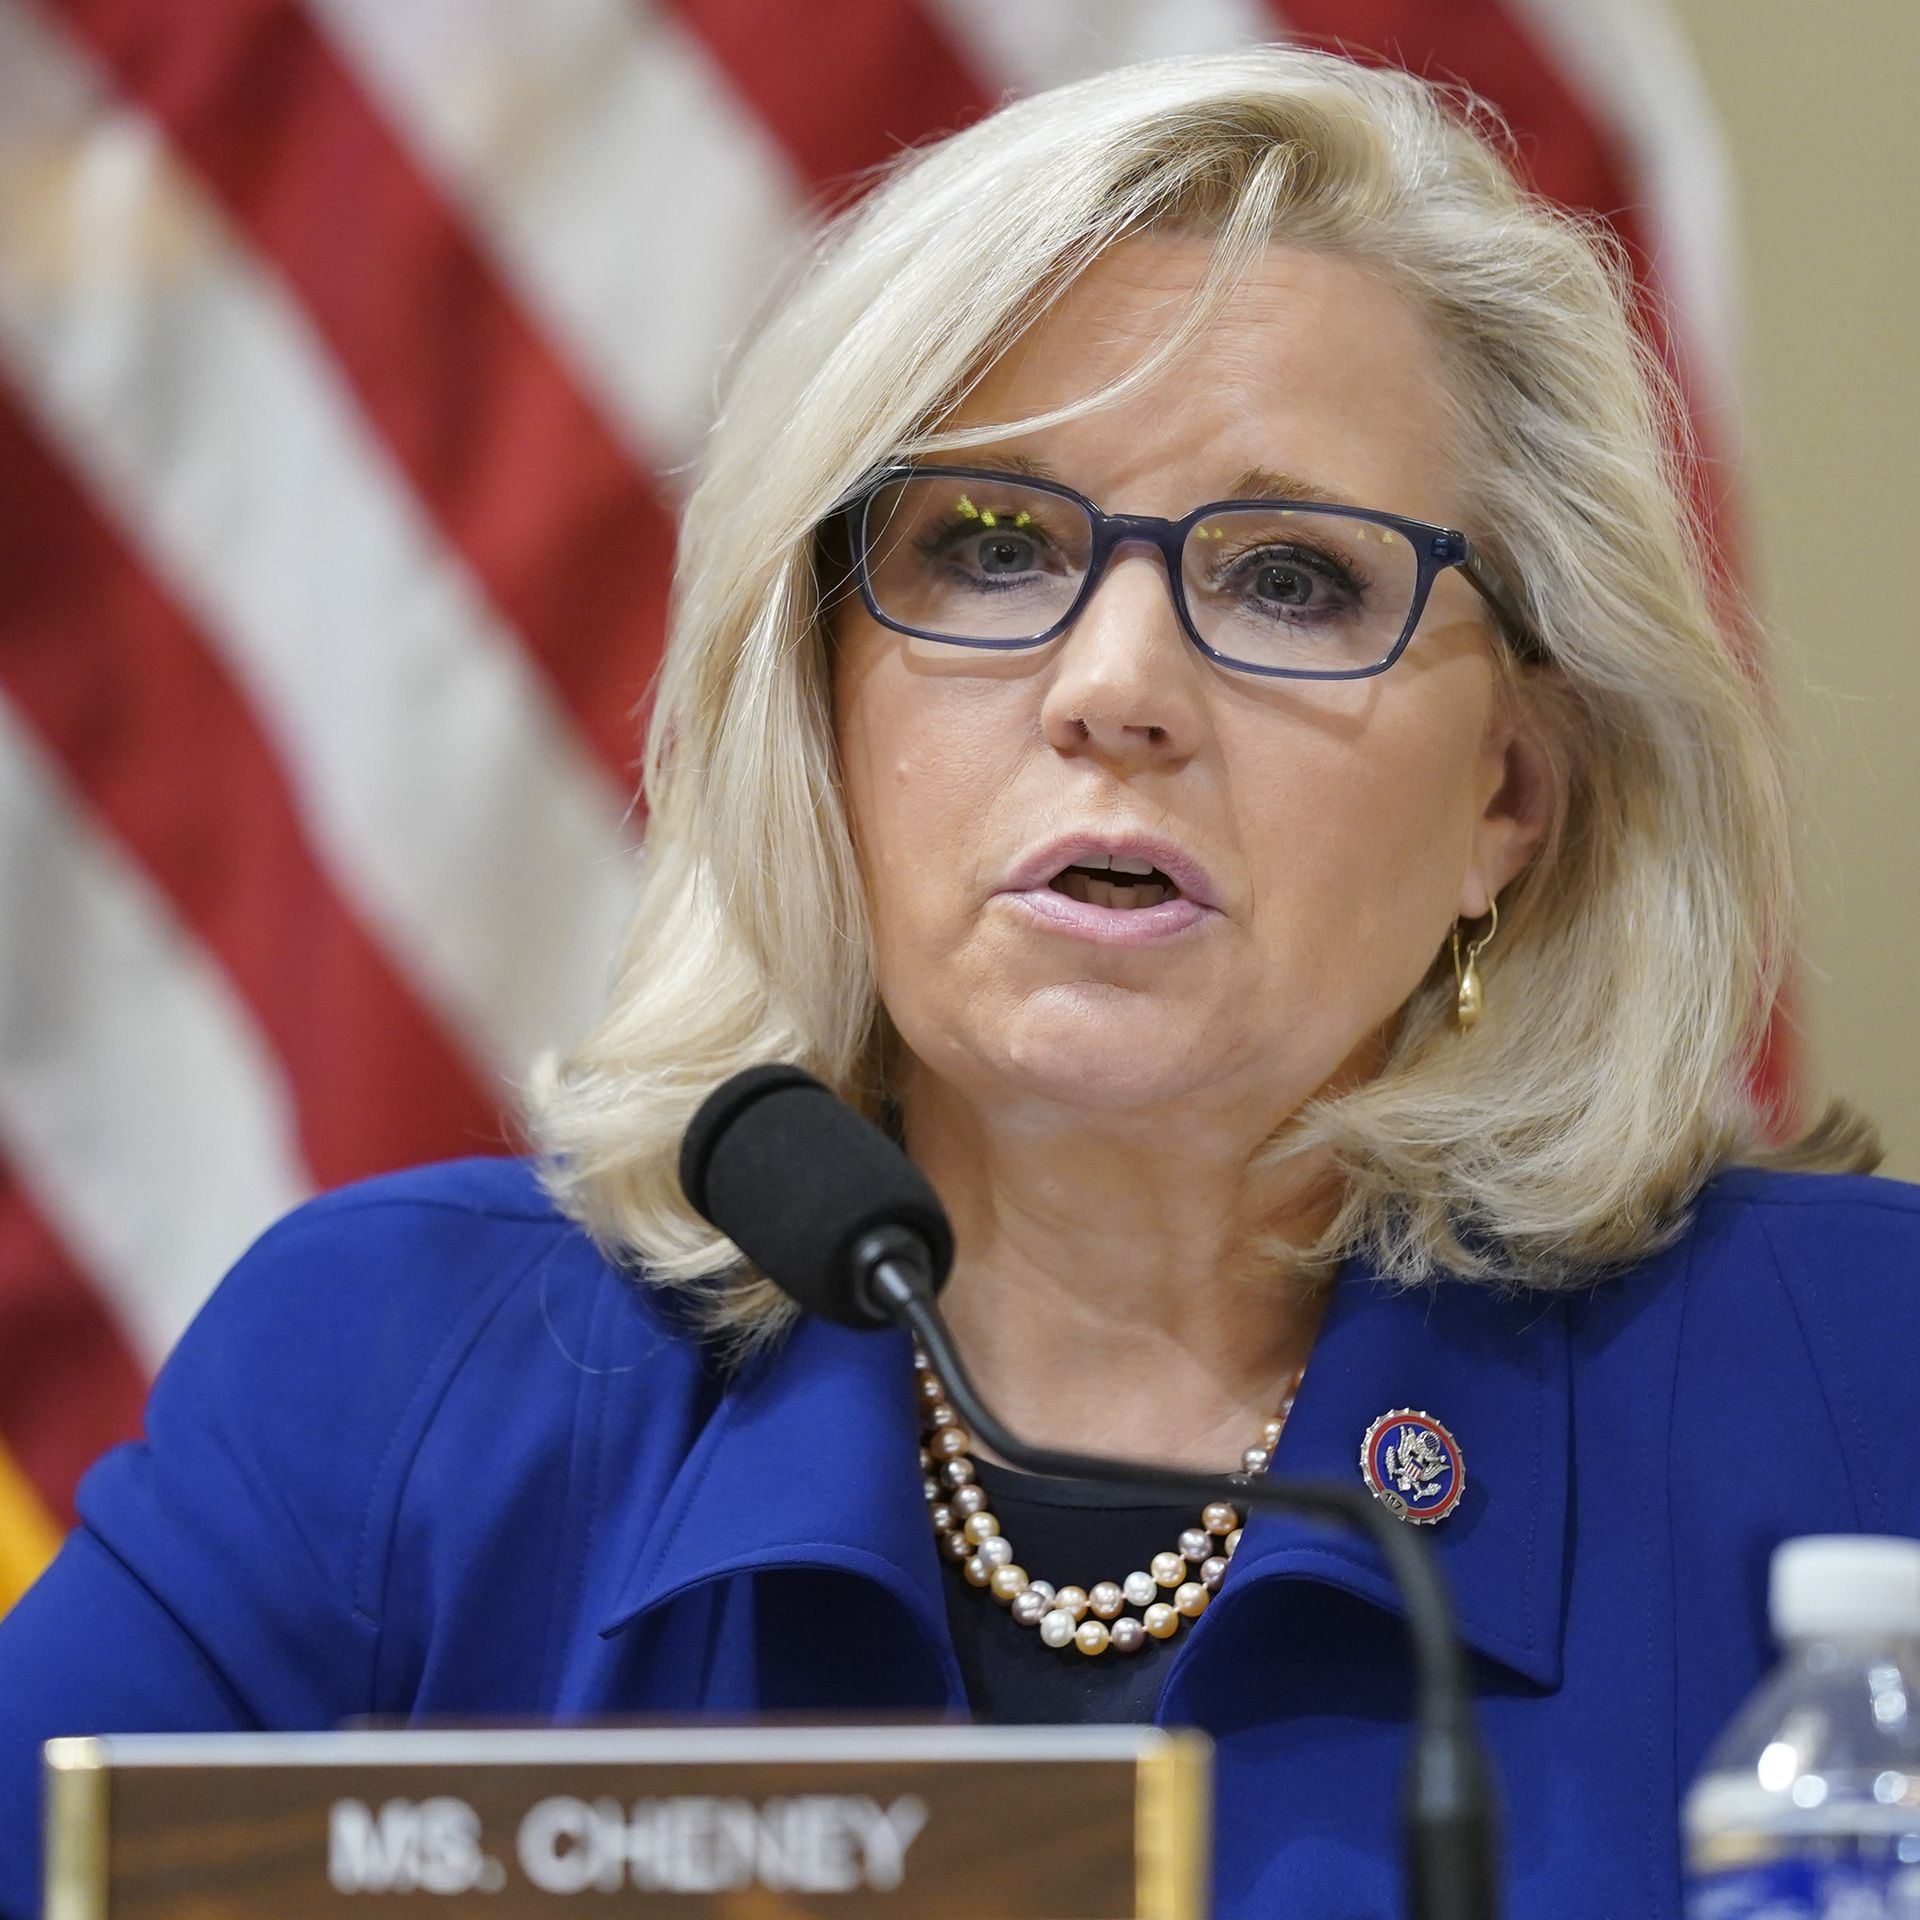 Representative Liz Cheney, a Republican from Wyoming, speaks during a hearing for the Select Committee to Investigate the January 6th Attack